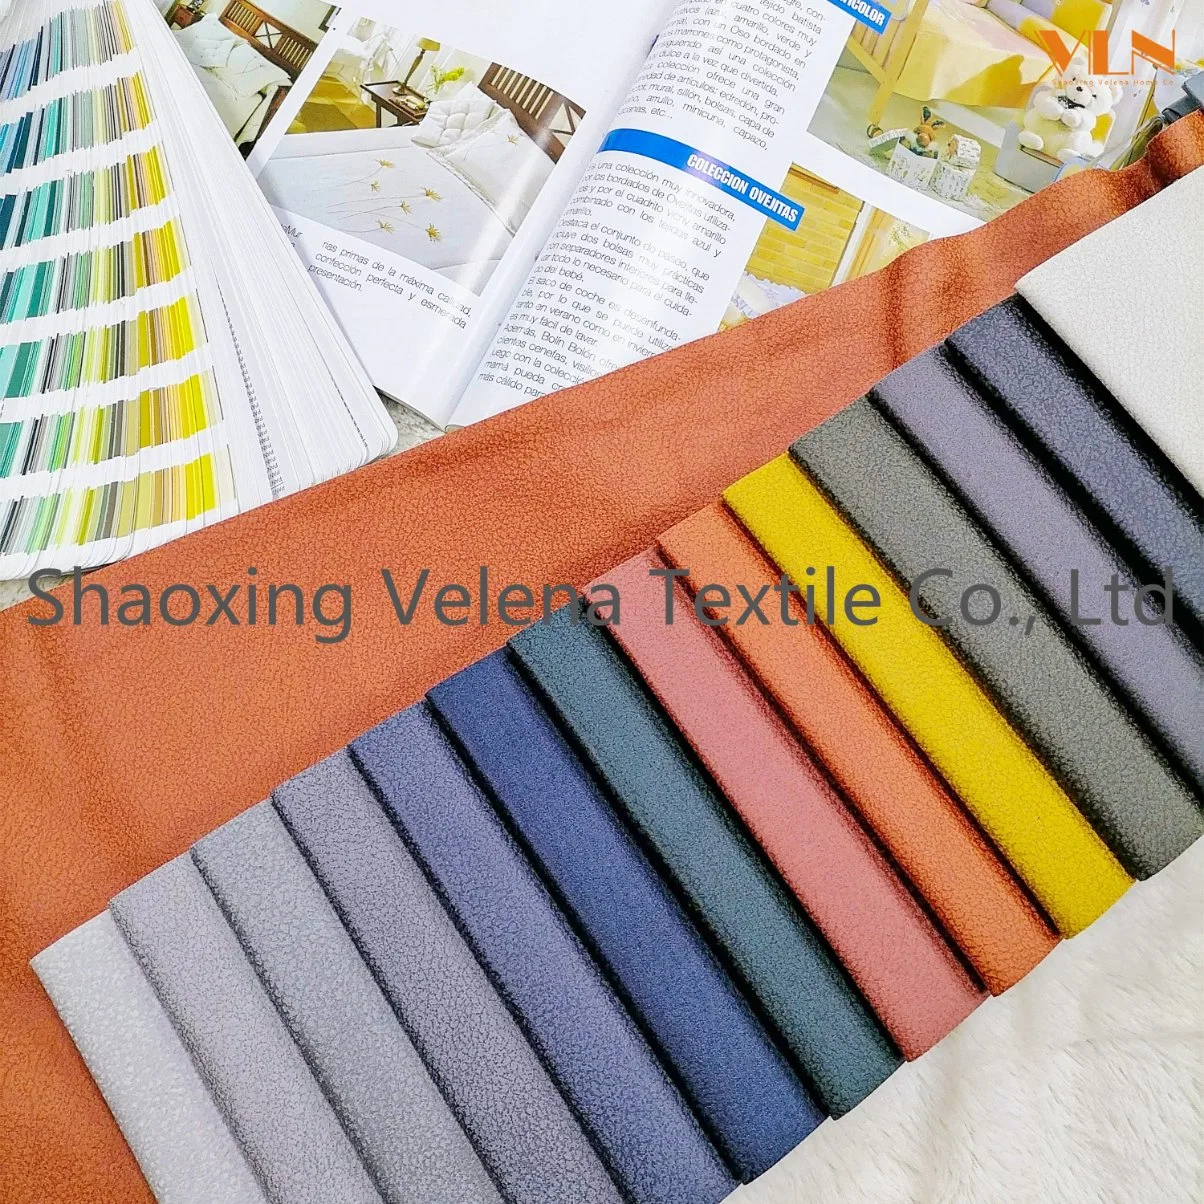 China Factory Technology Leather Suede Velvet Fabric Dyeing with Glue Emboss Upholstery Furniture Sofa Textile Fabric